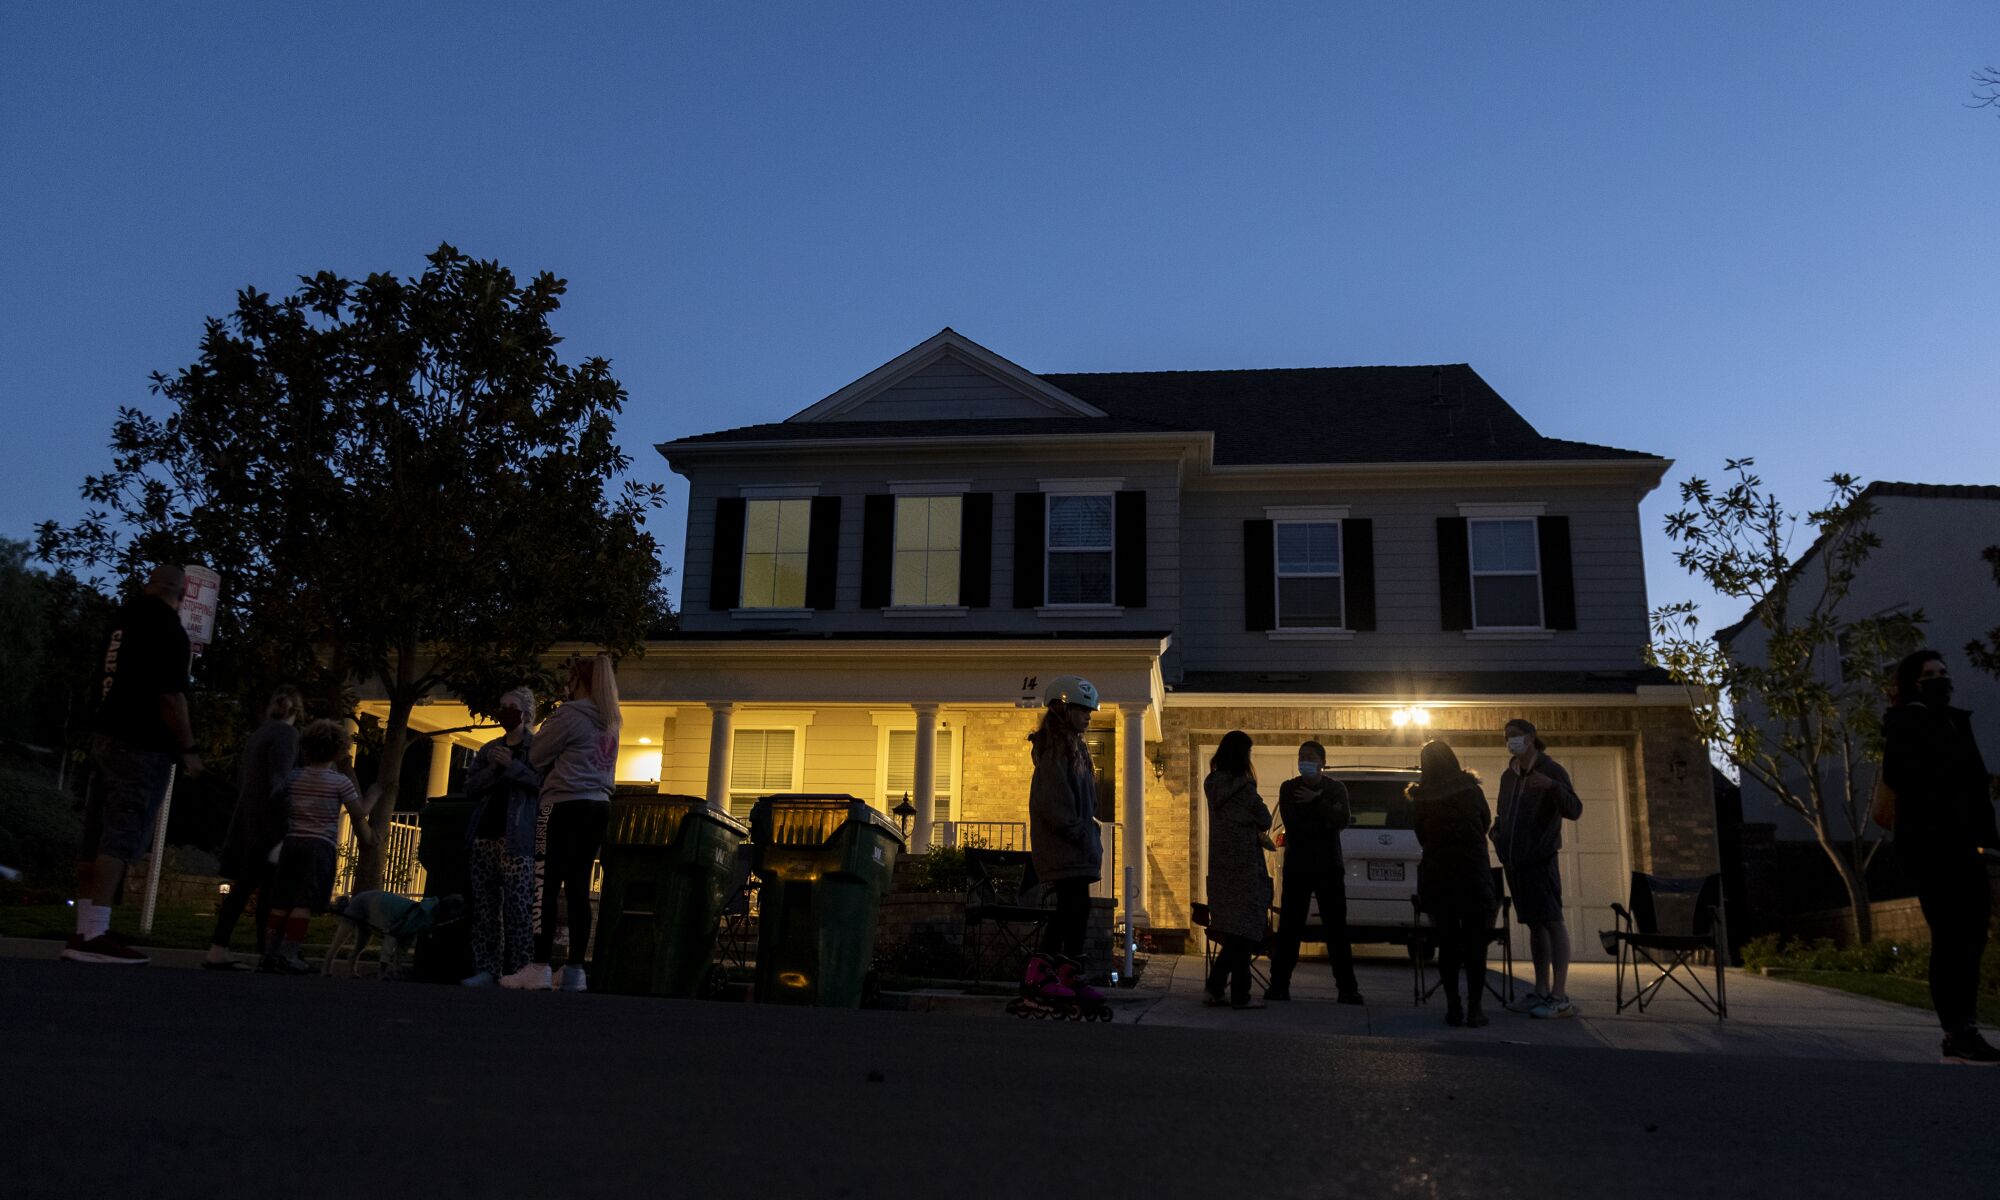 As dusk falls on Haijun Si's home, neighbors gather in front to form a nightly security detail